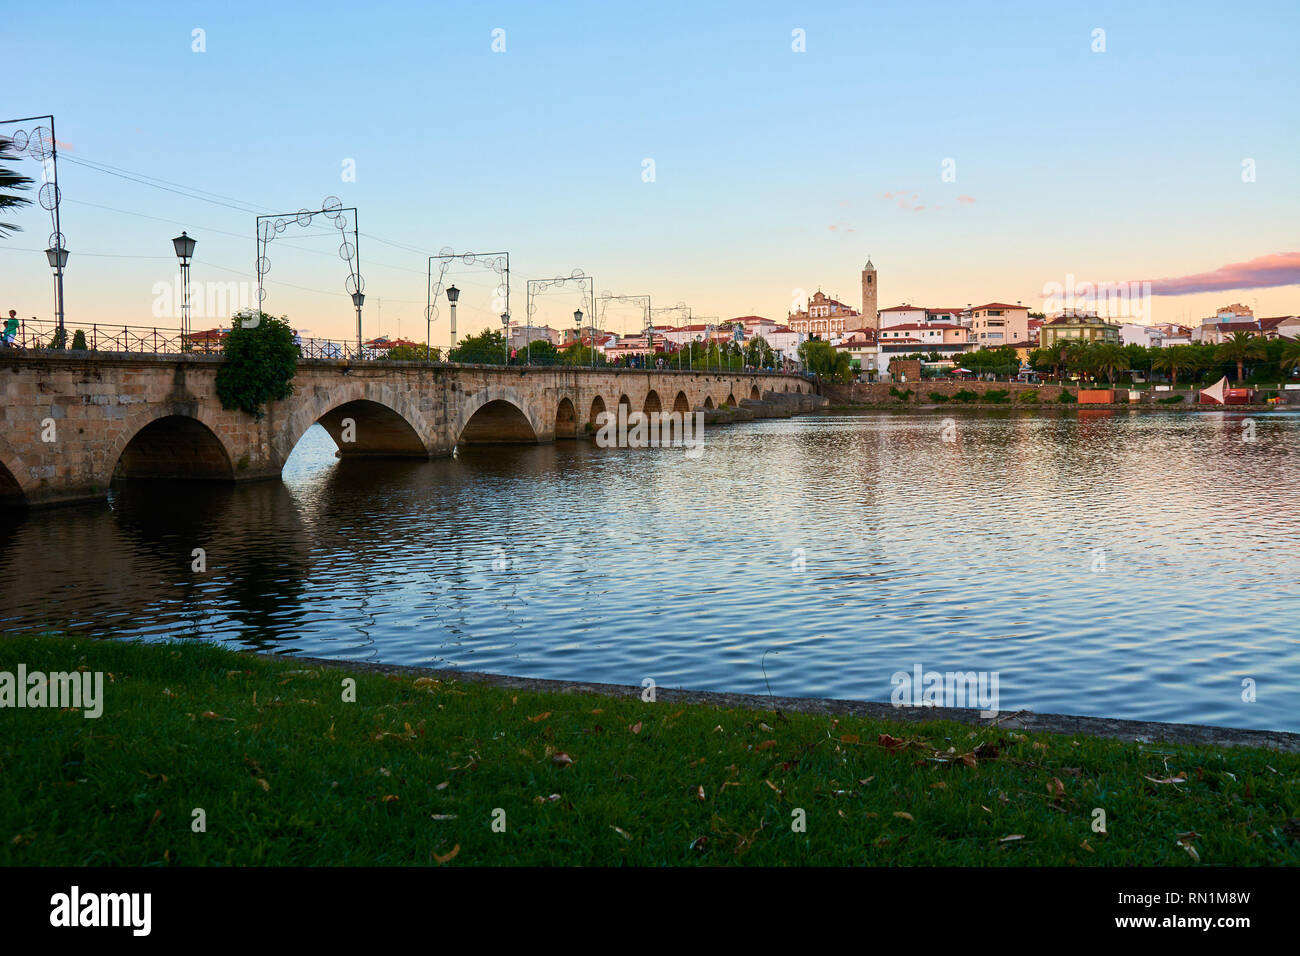 Mirandela, Portugal - July 20, 2014 : View of the pedestrian bridge over the Tua River in Mirandela, portugal Stock Photo